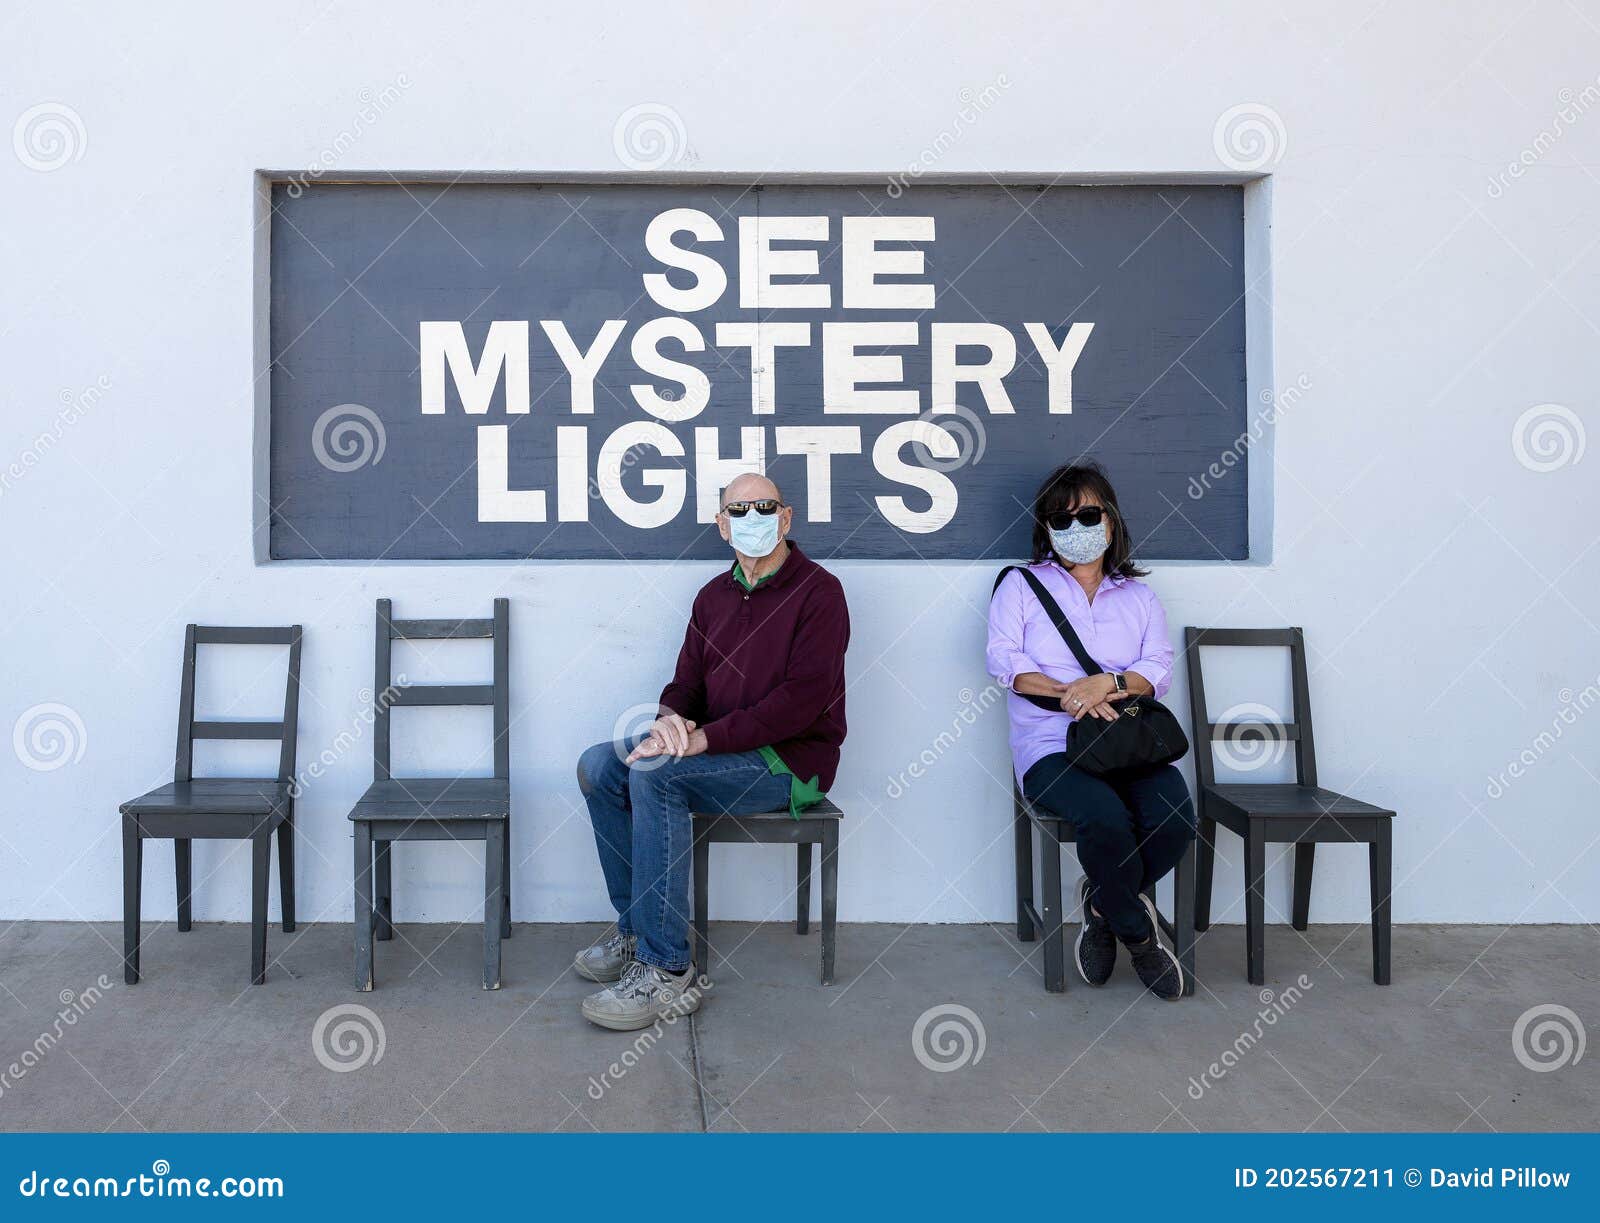 husband and wife at a photography spot in marfa, texas referring to the famous marfa mystery lights.